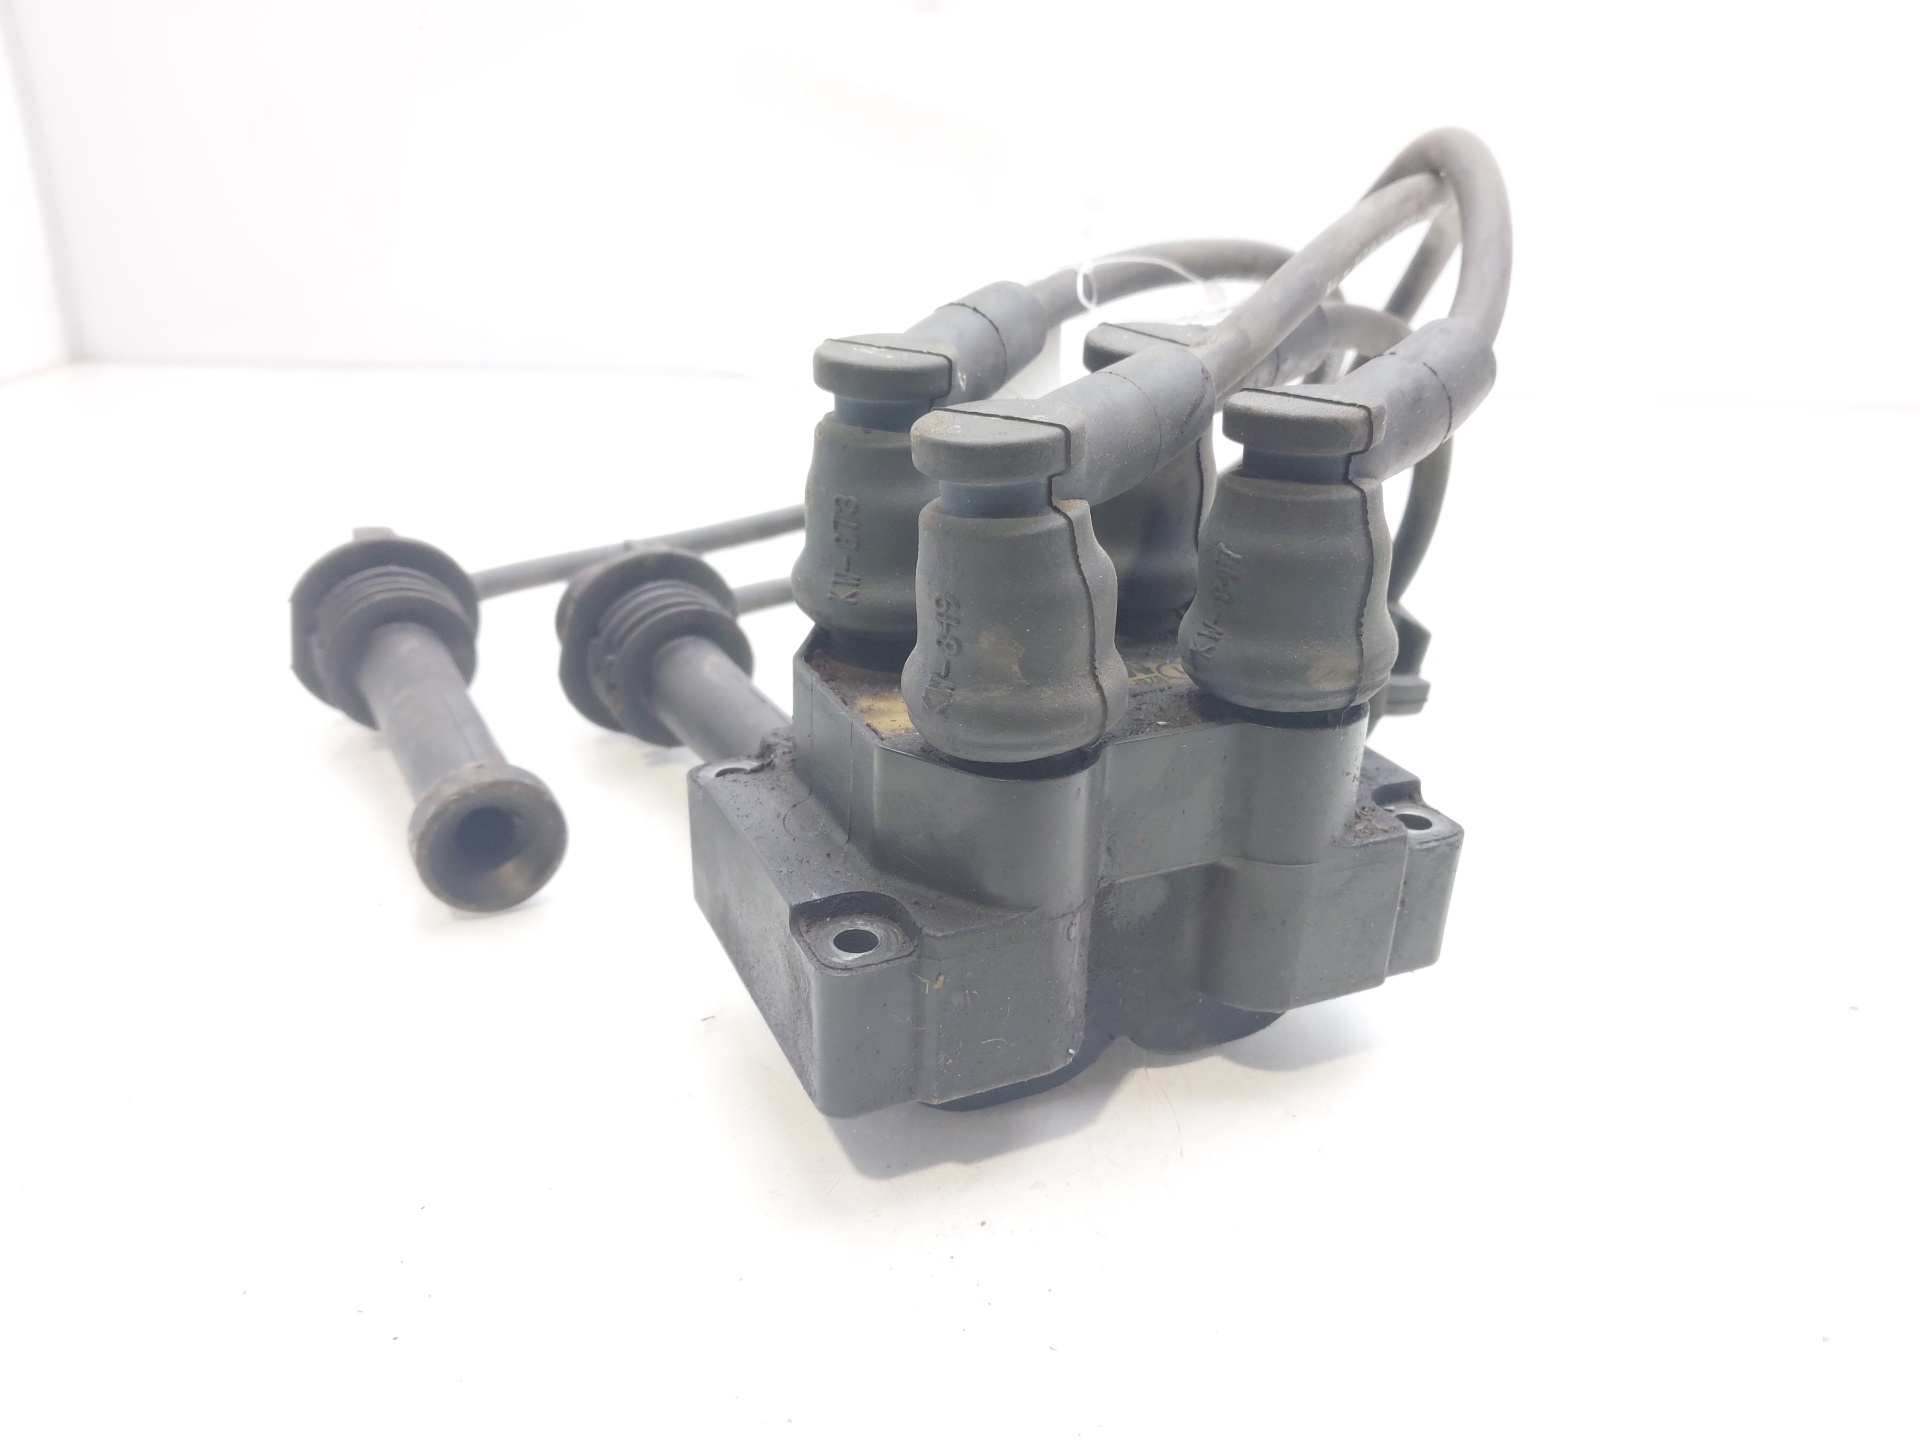 FORD Transit High Voltage Ignition Coil 928F12029CA 23031960